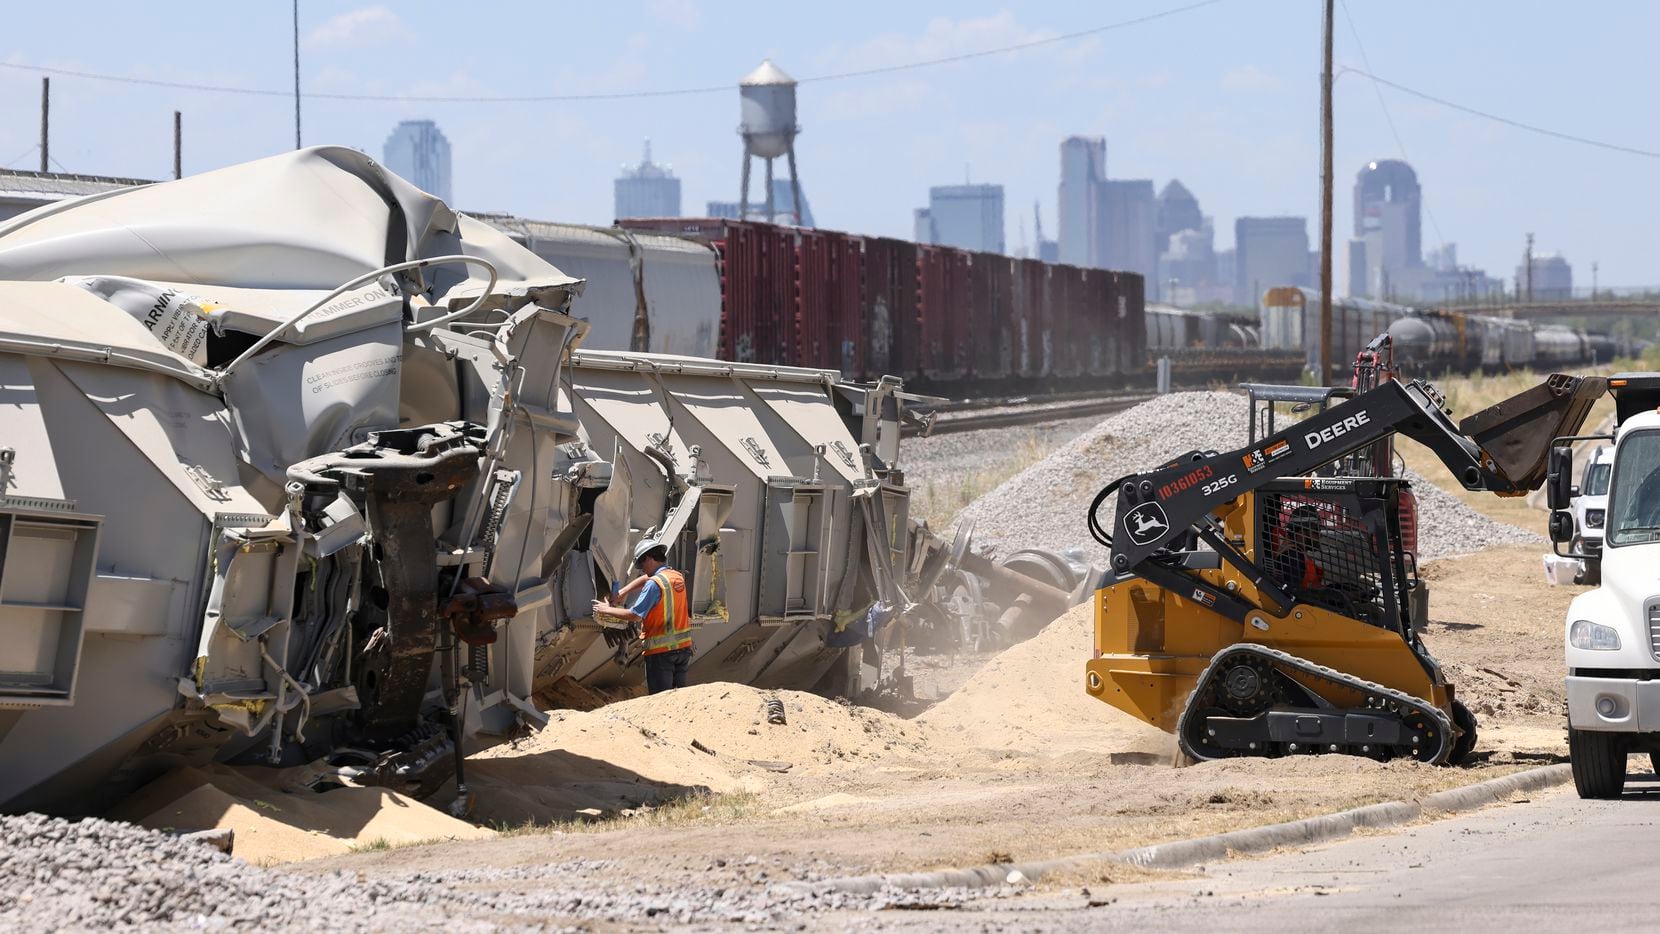 Contract workers from Hulcher move sand and debris during the aftermath clean up from a...